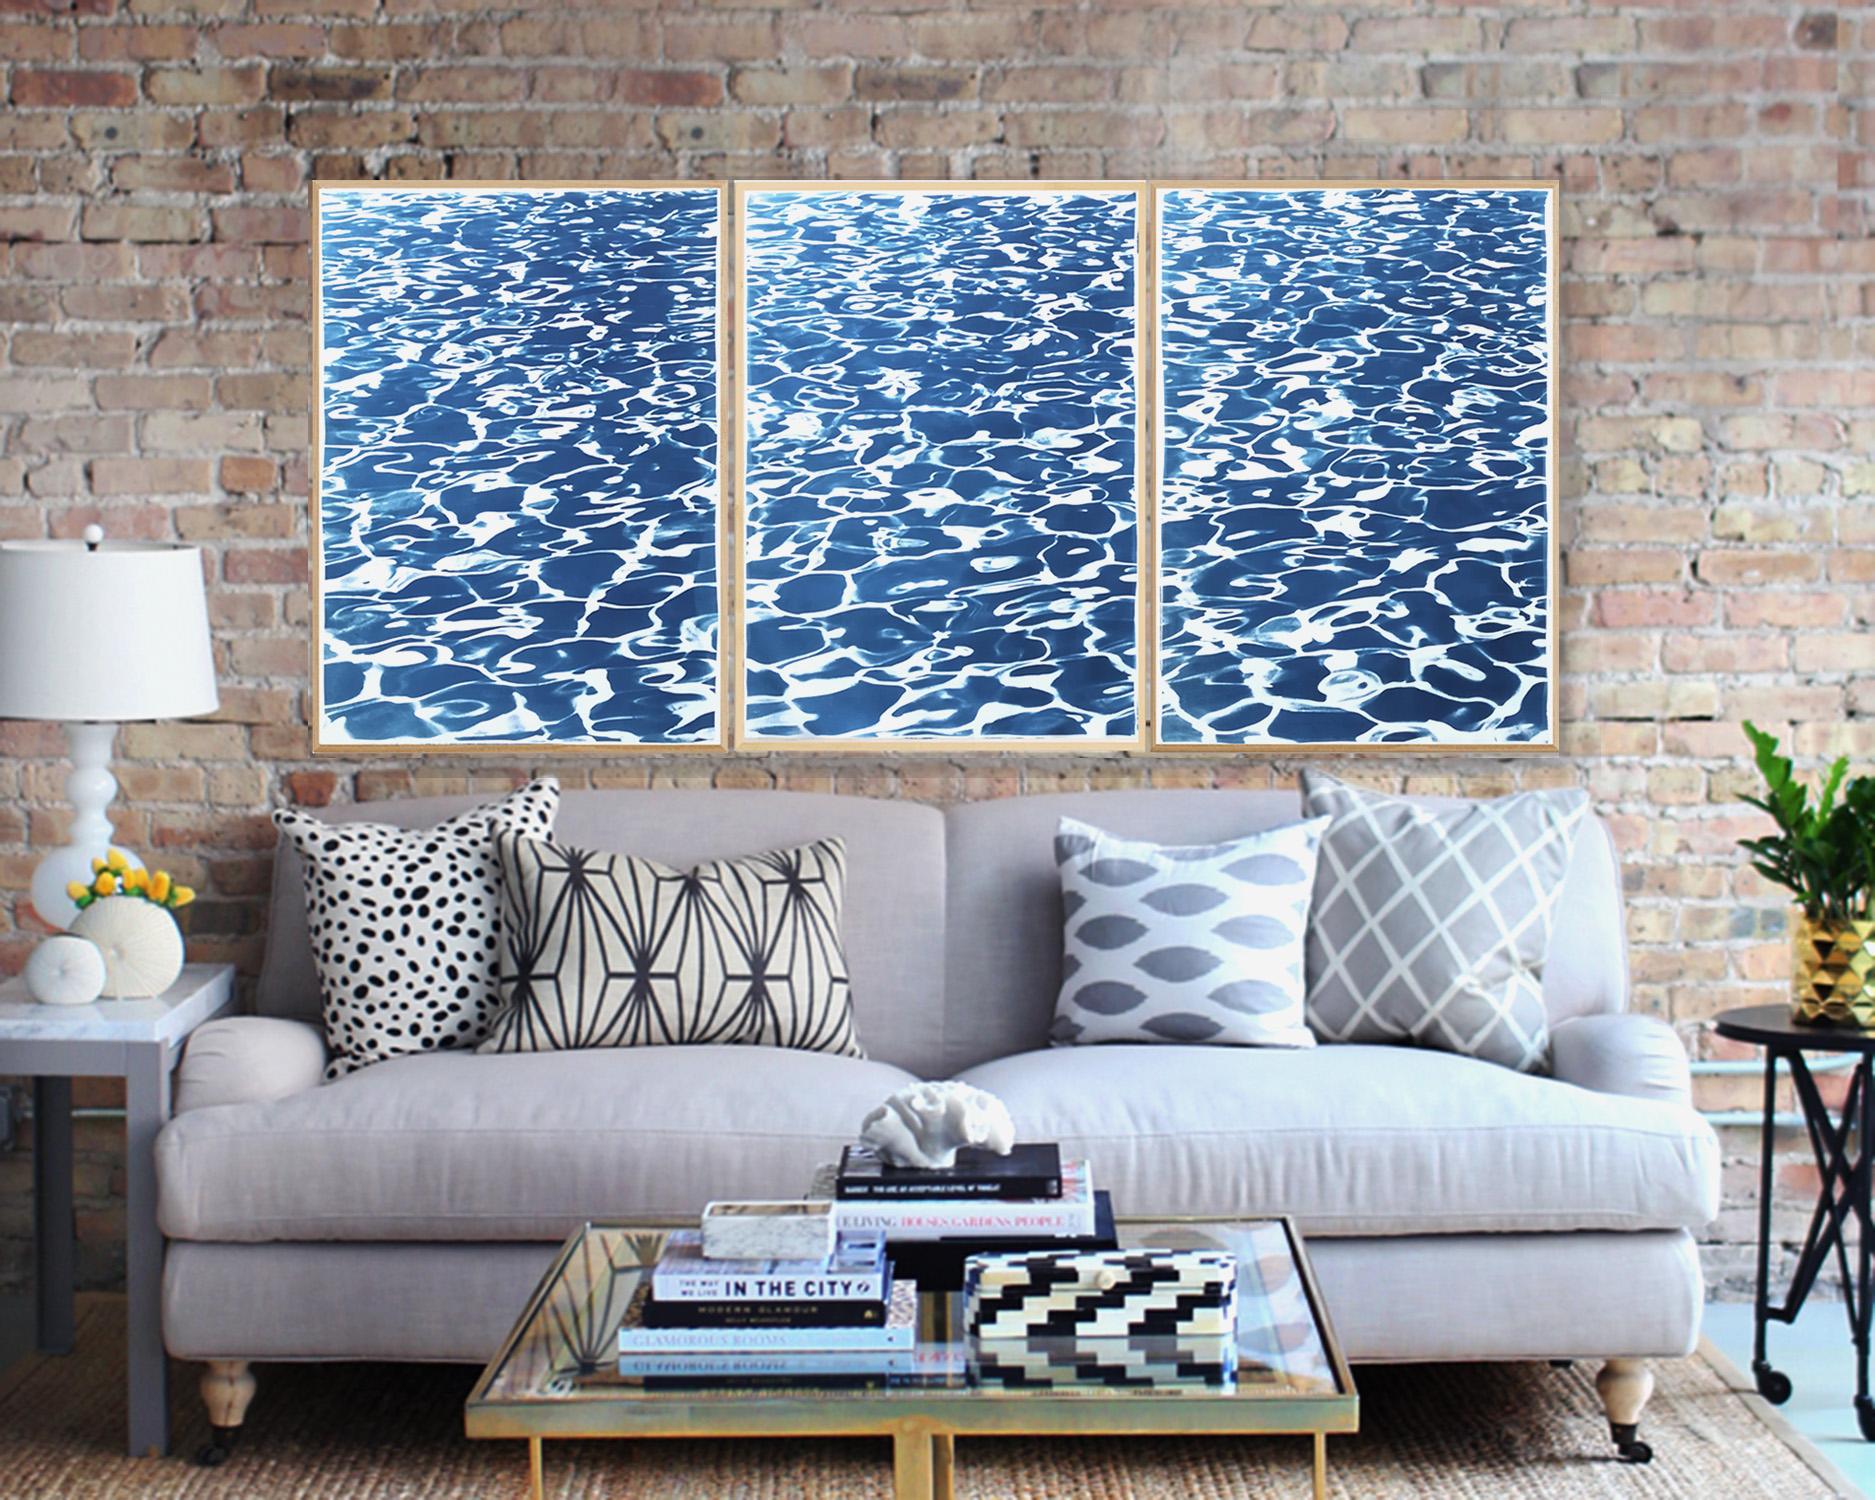 This is an exclusive handprinted limited edition of a cyanotype.
This beautiful triptych is called 